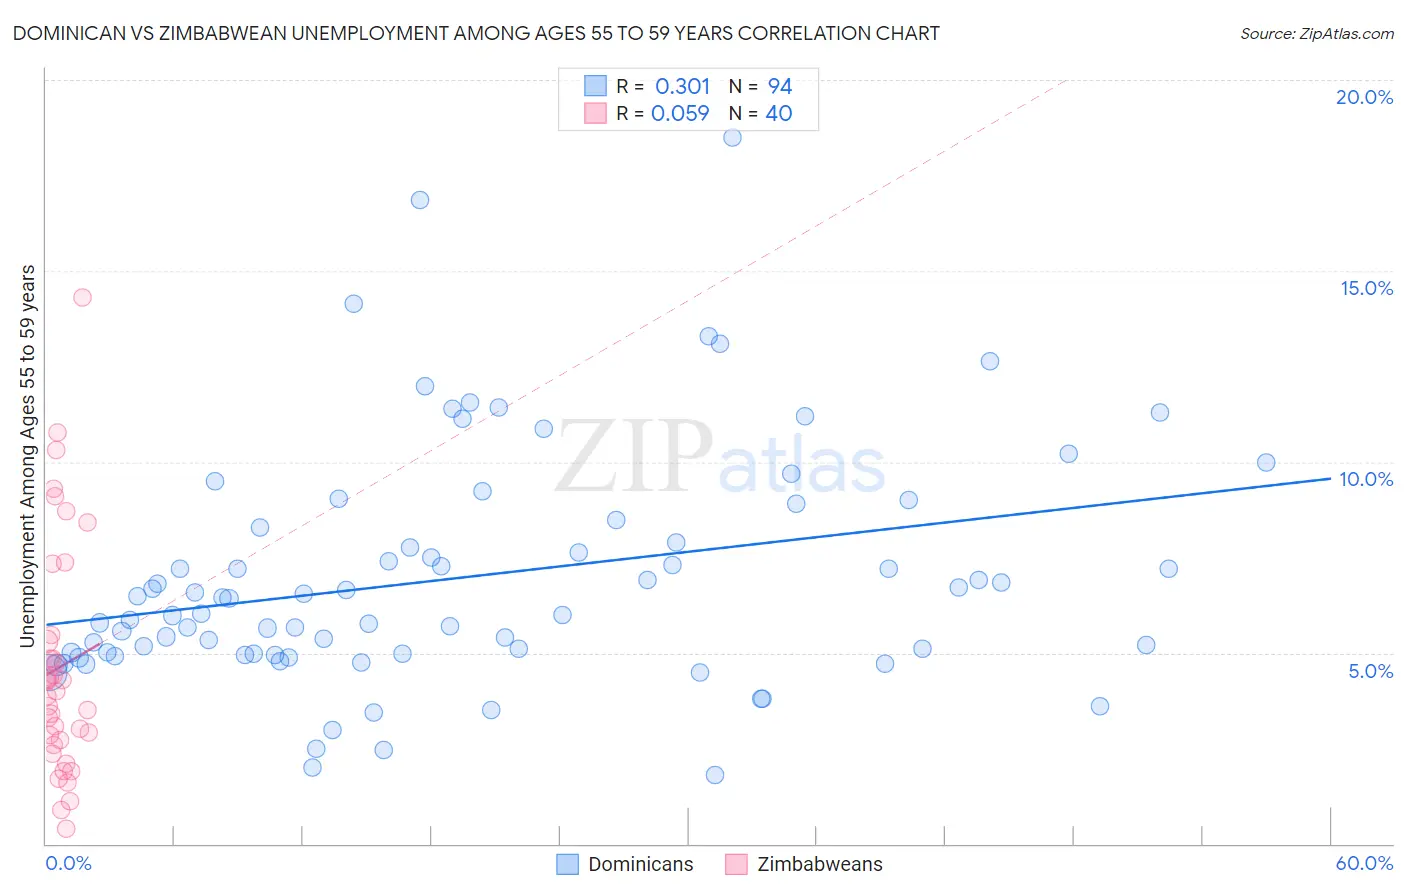 Dominican vs Zimbabwean Unemployment Among Ages 55 to 59 years